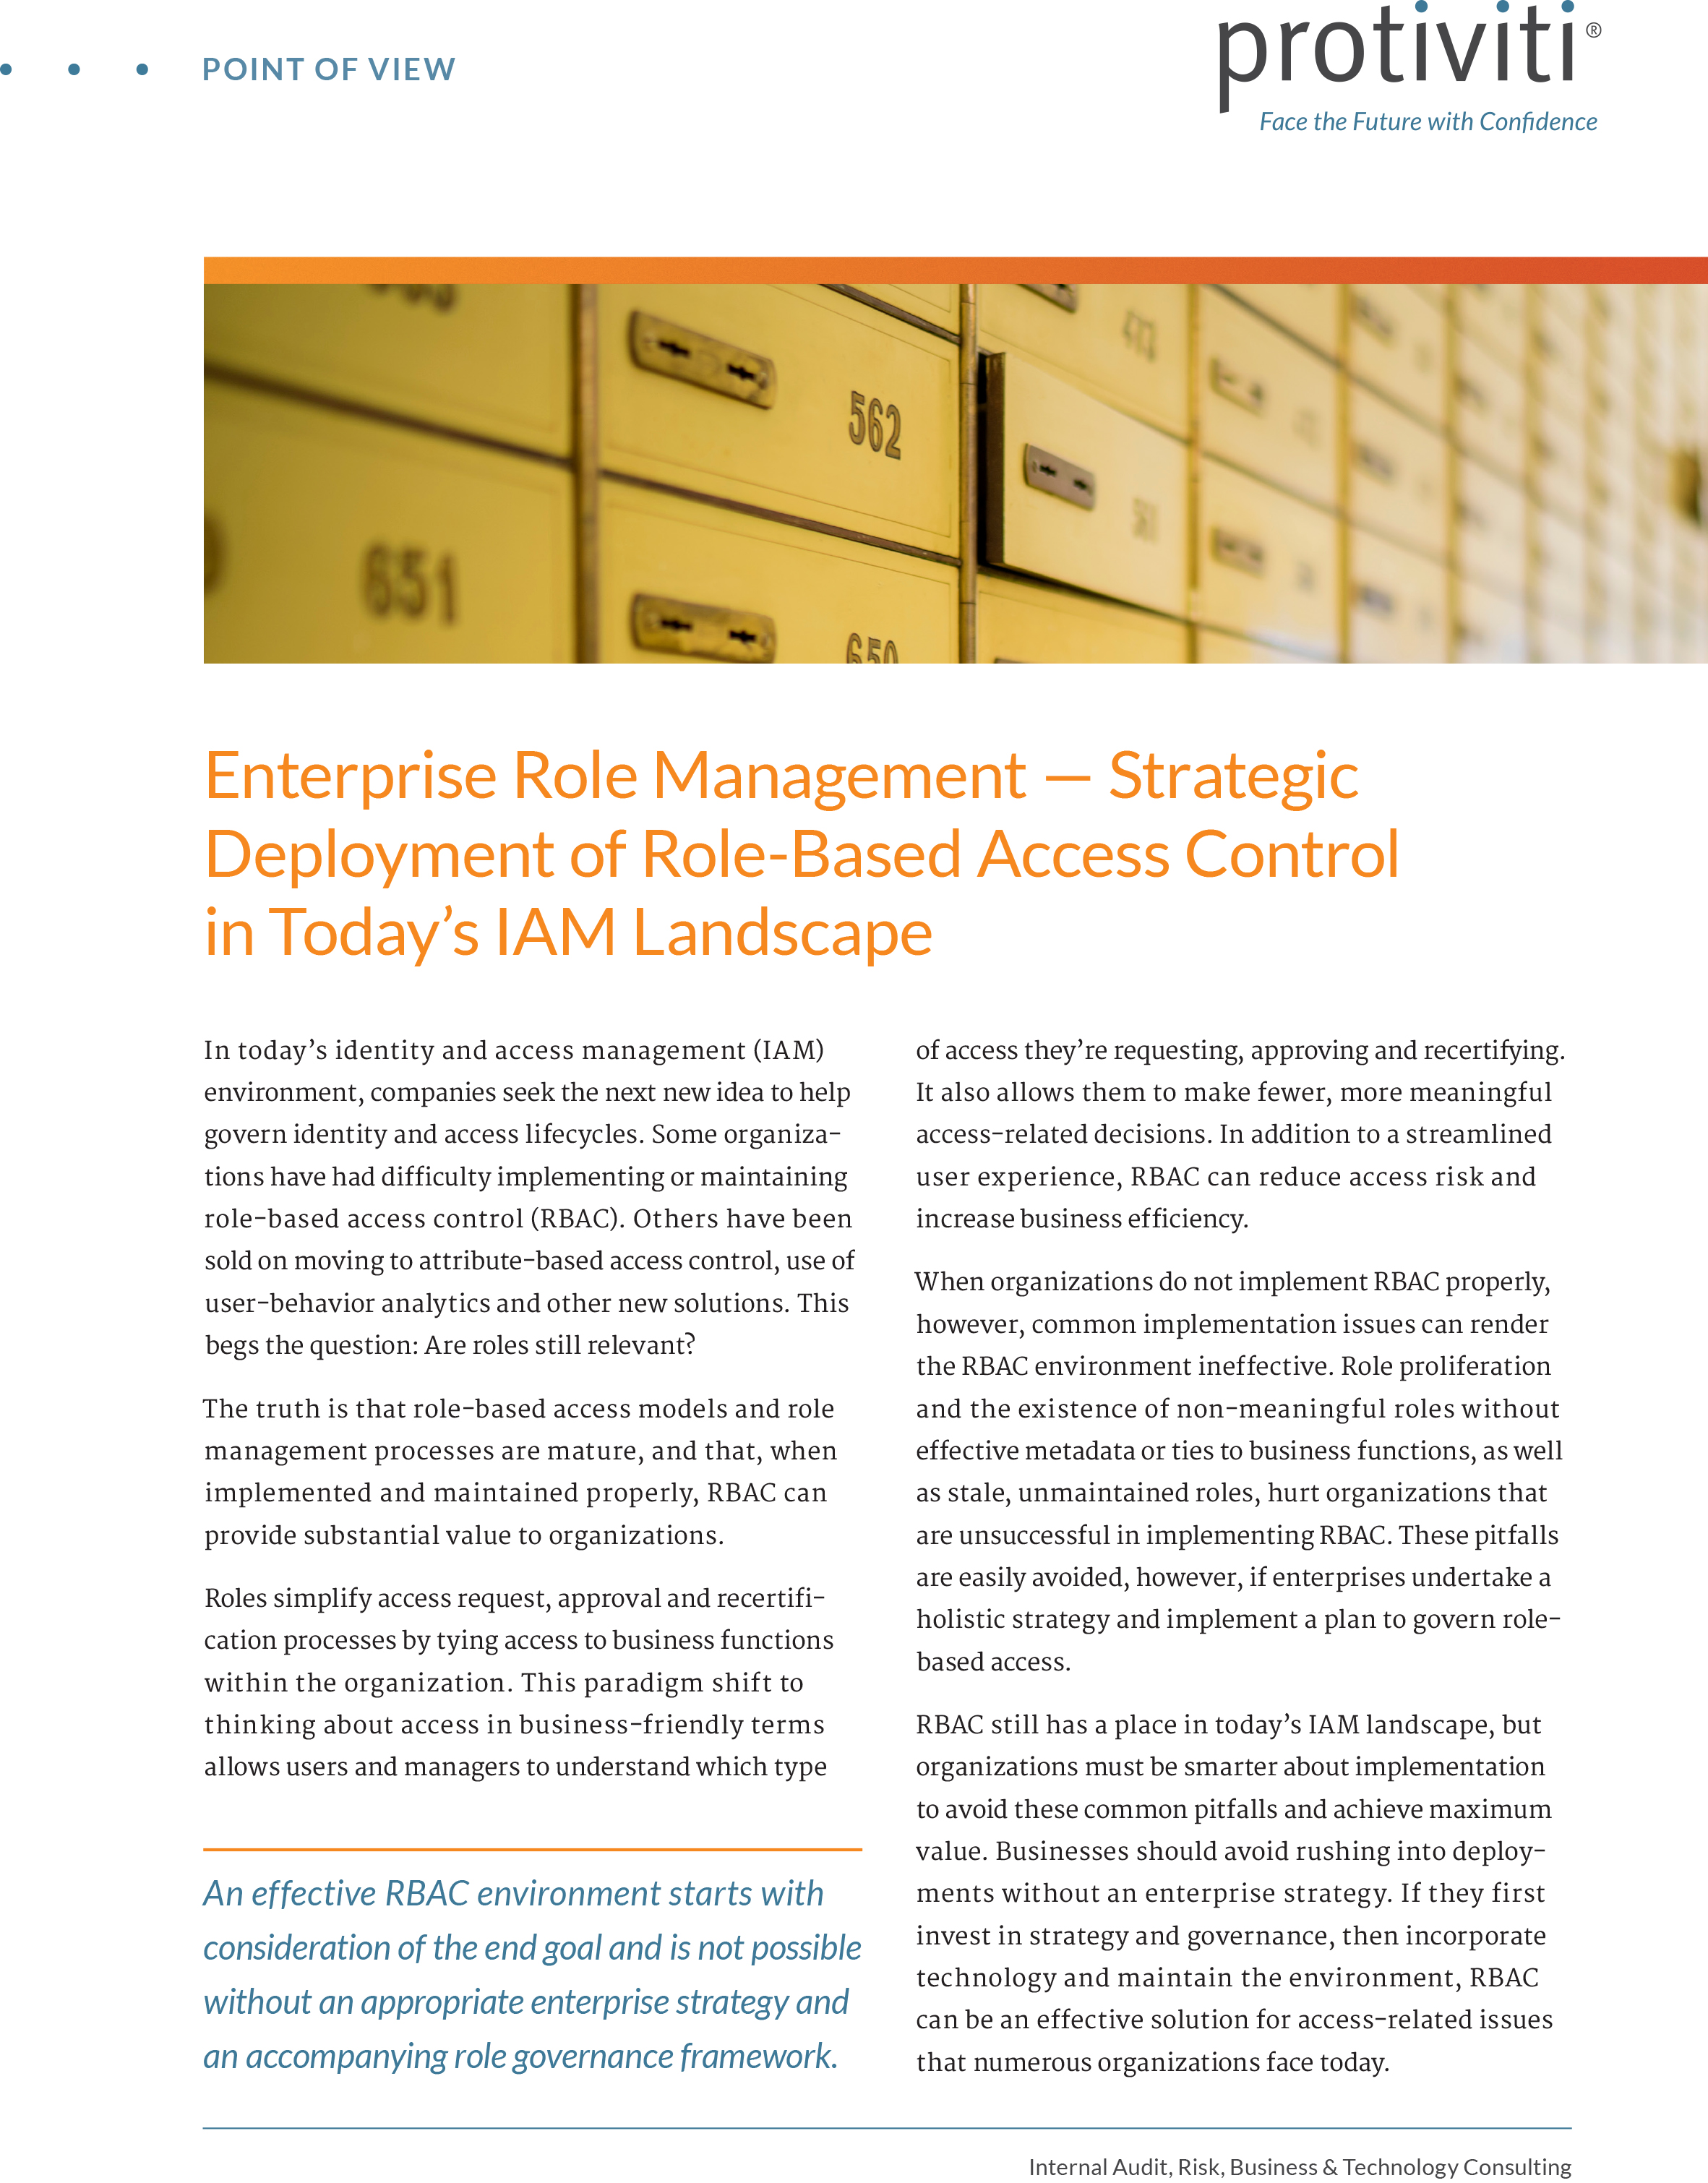 Screenshot of the first page of Enterprise Role Management - Strategic Deployment of Role-Based Access Control in Today’s IAM Landscape